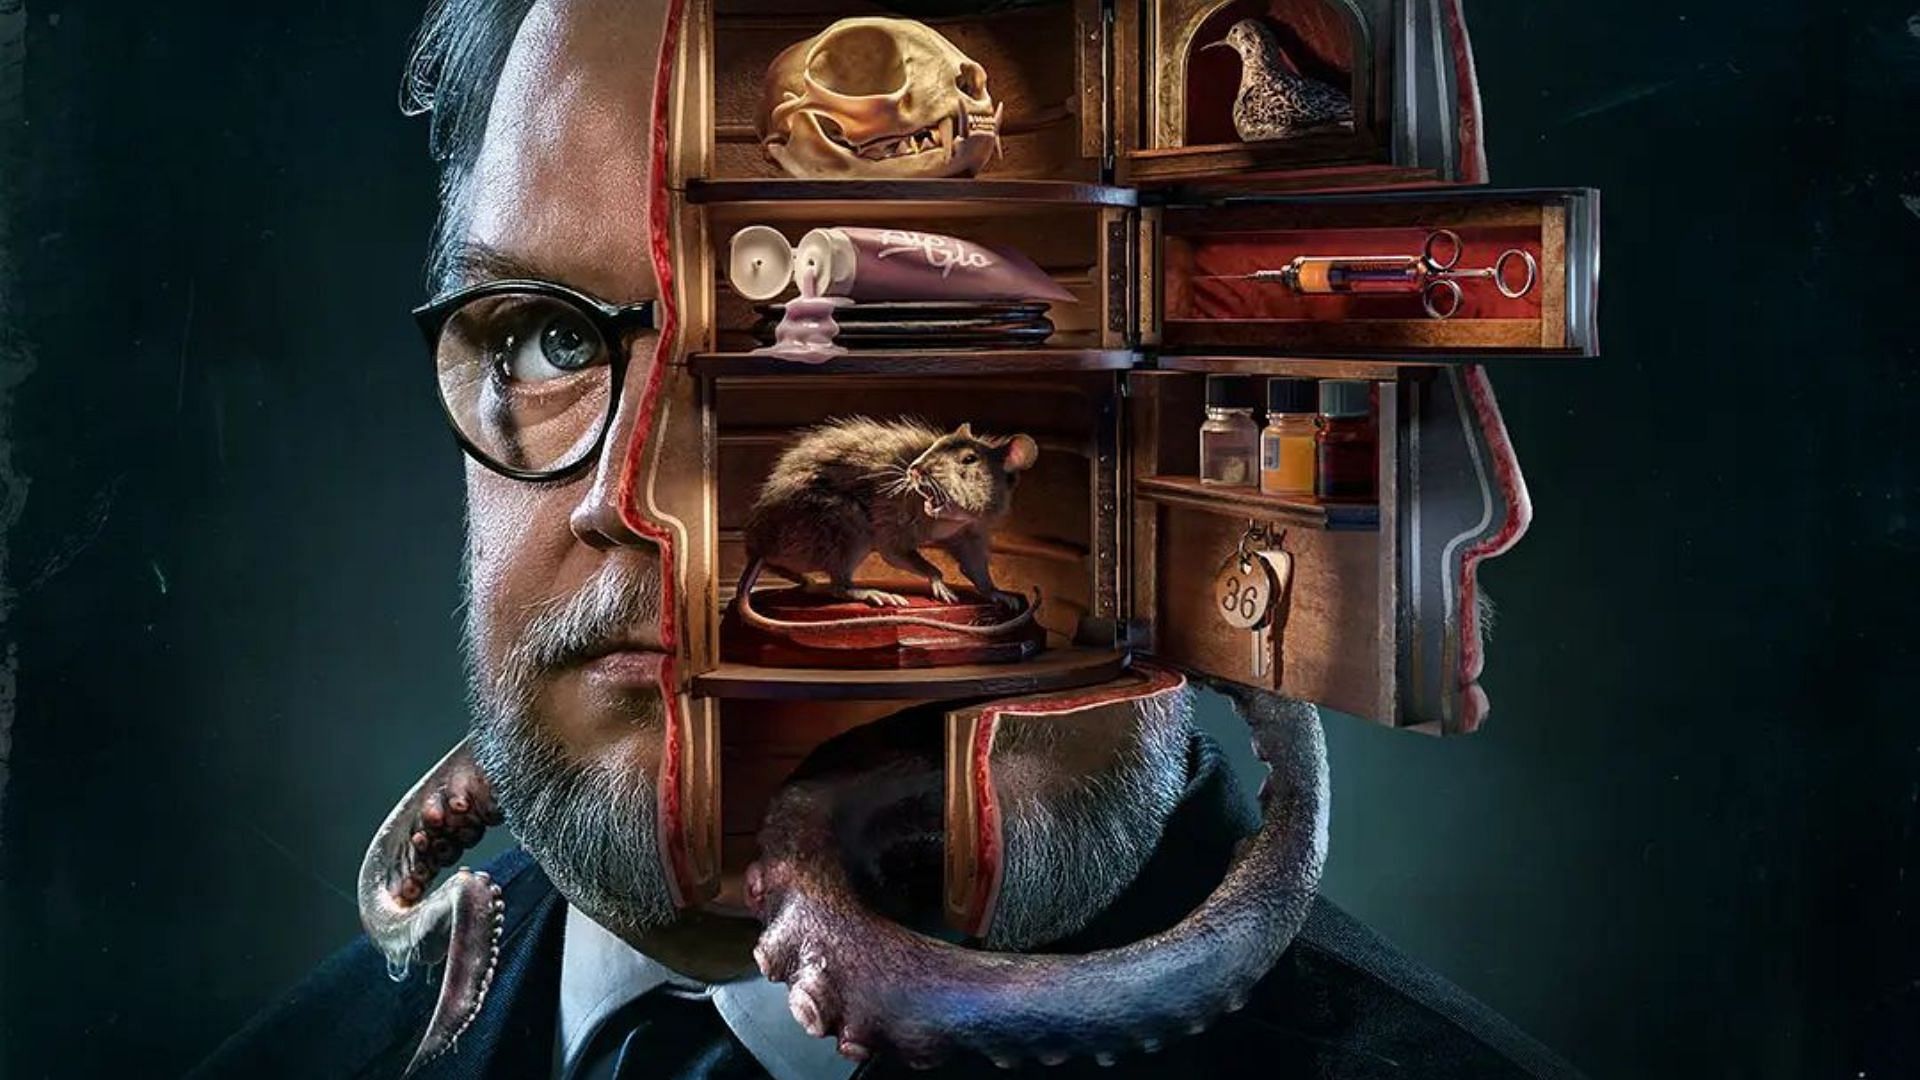 A promotional poster for Guillermo Del Toro